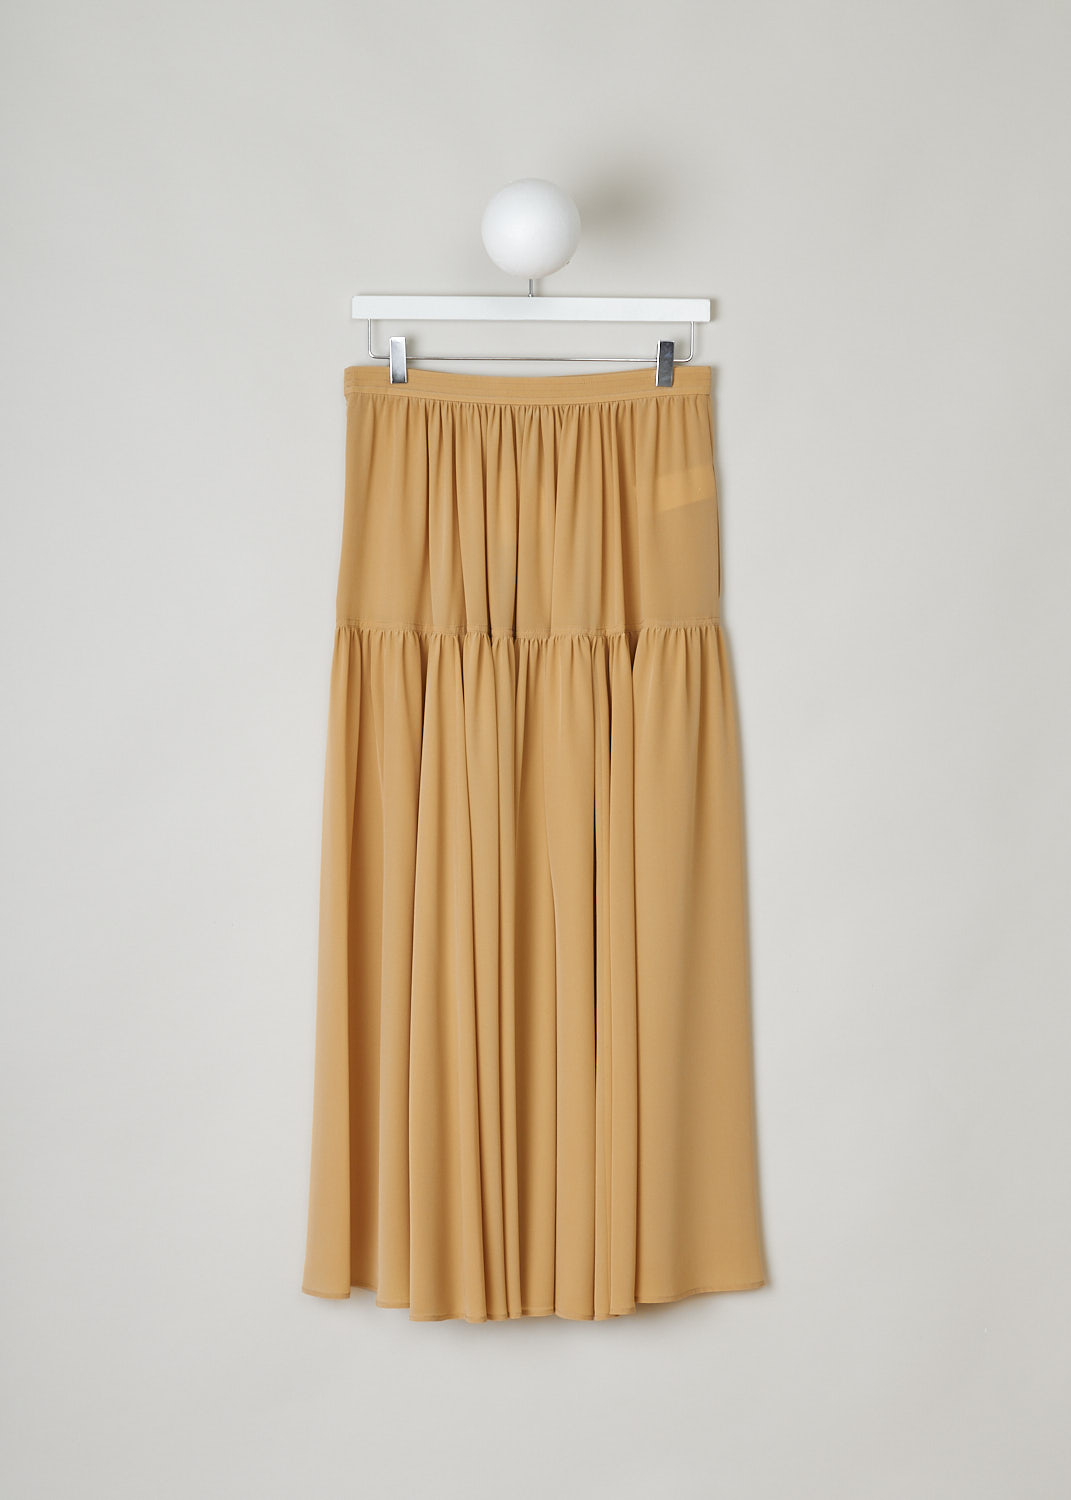 CHLOÃ‰, PEARL BEIGE TIERED MAXI SKIRT, CHC22UJU03004278, Beige, Back, This pearl beige tiered pleated maxi skirt has a narrow waistband. A concealed side zip functions as the closure option.
 
